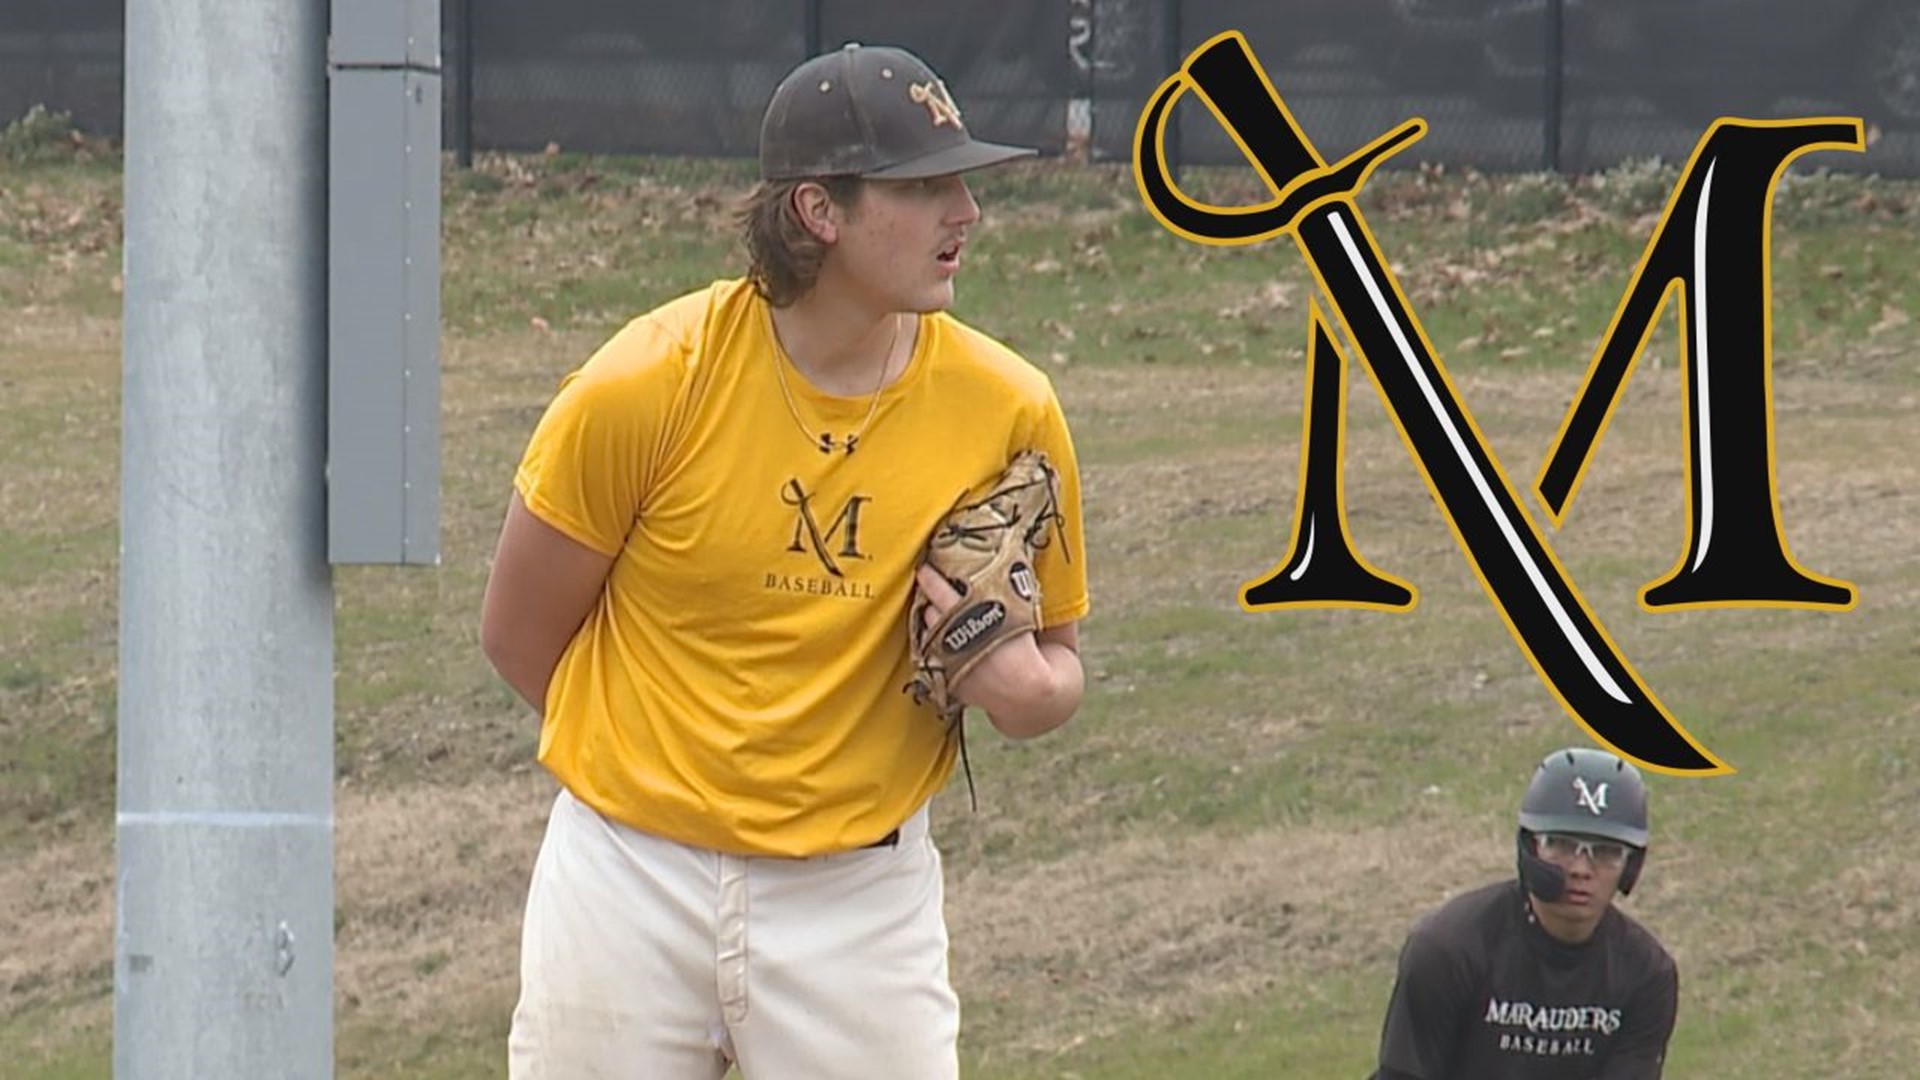 Each day, Millersville's Alex Mykut balances pitching, classes, and a job with the PIAA.